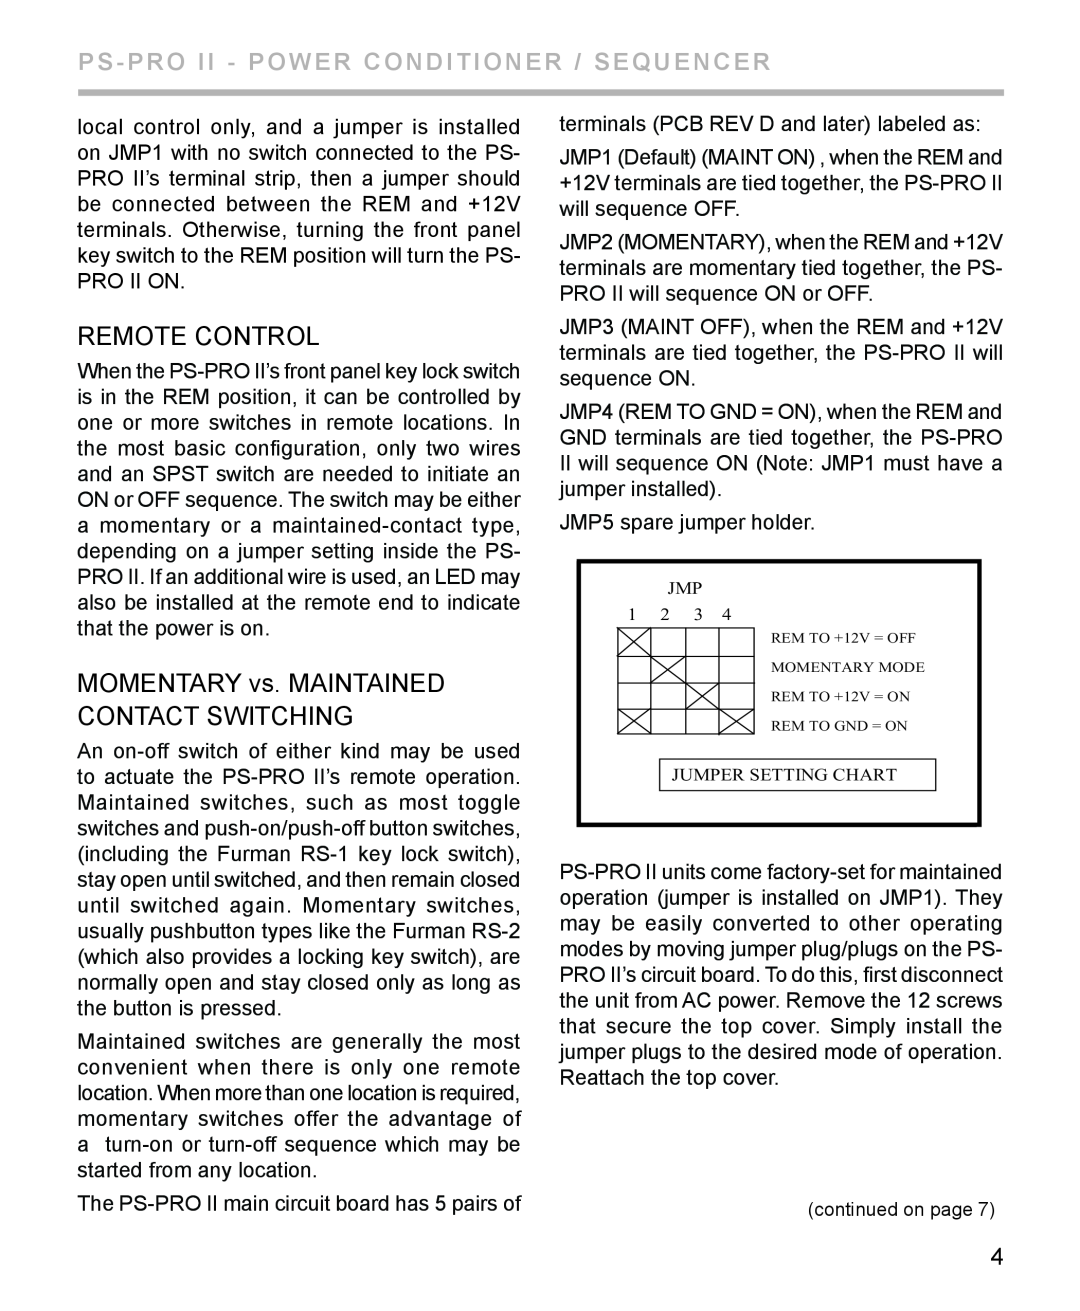 Furman Sound PS-PRO II manual remote control, Momentary vs. maintained contact switching 